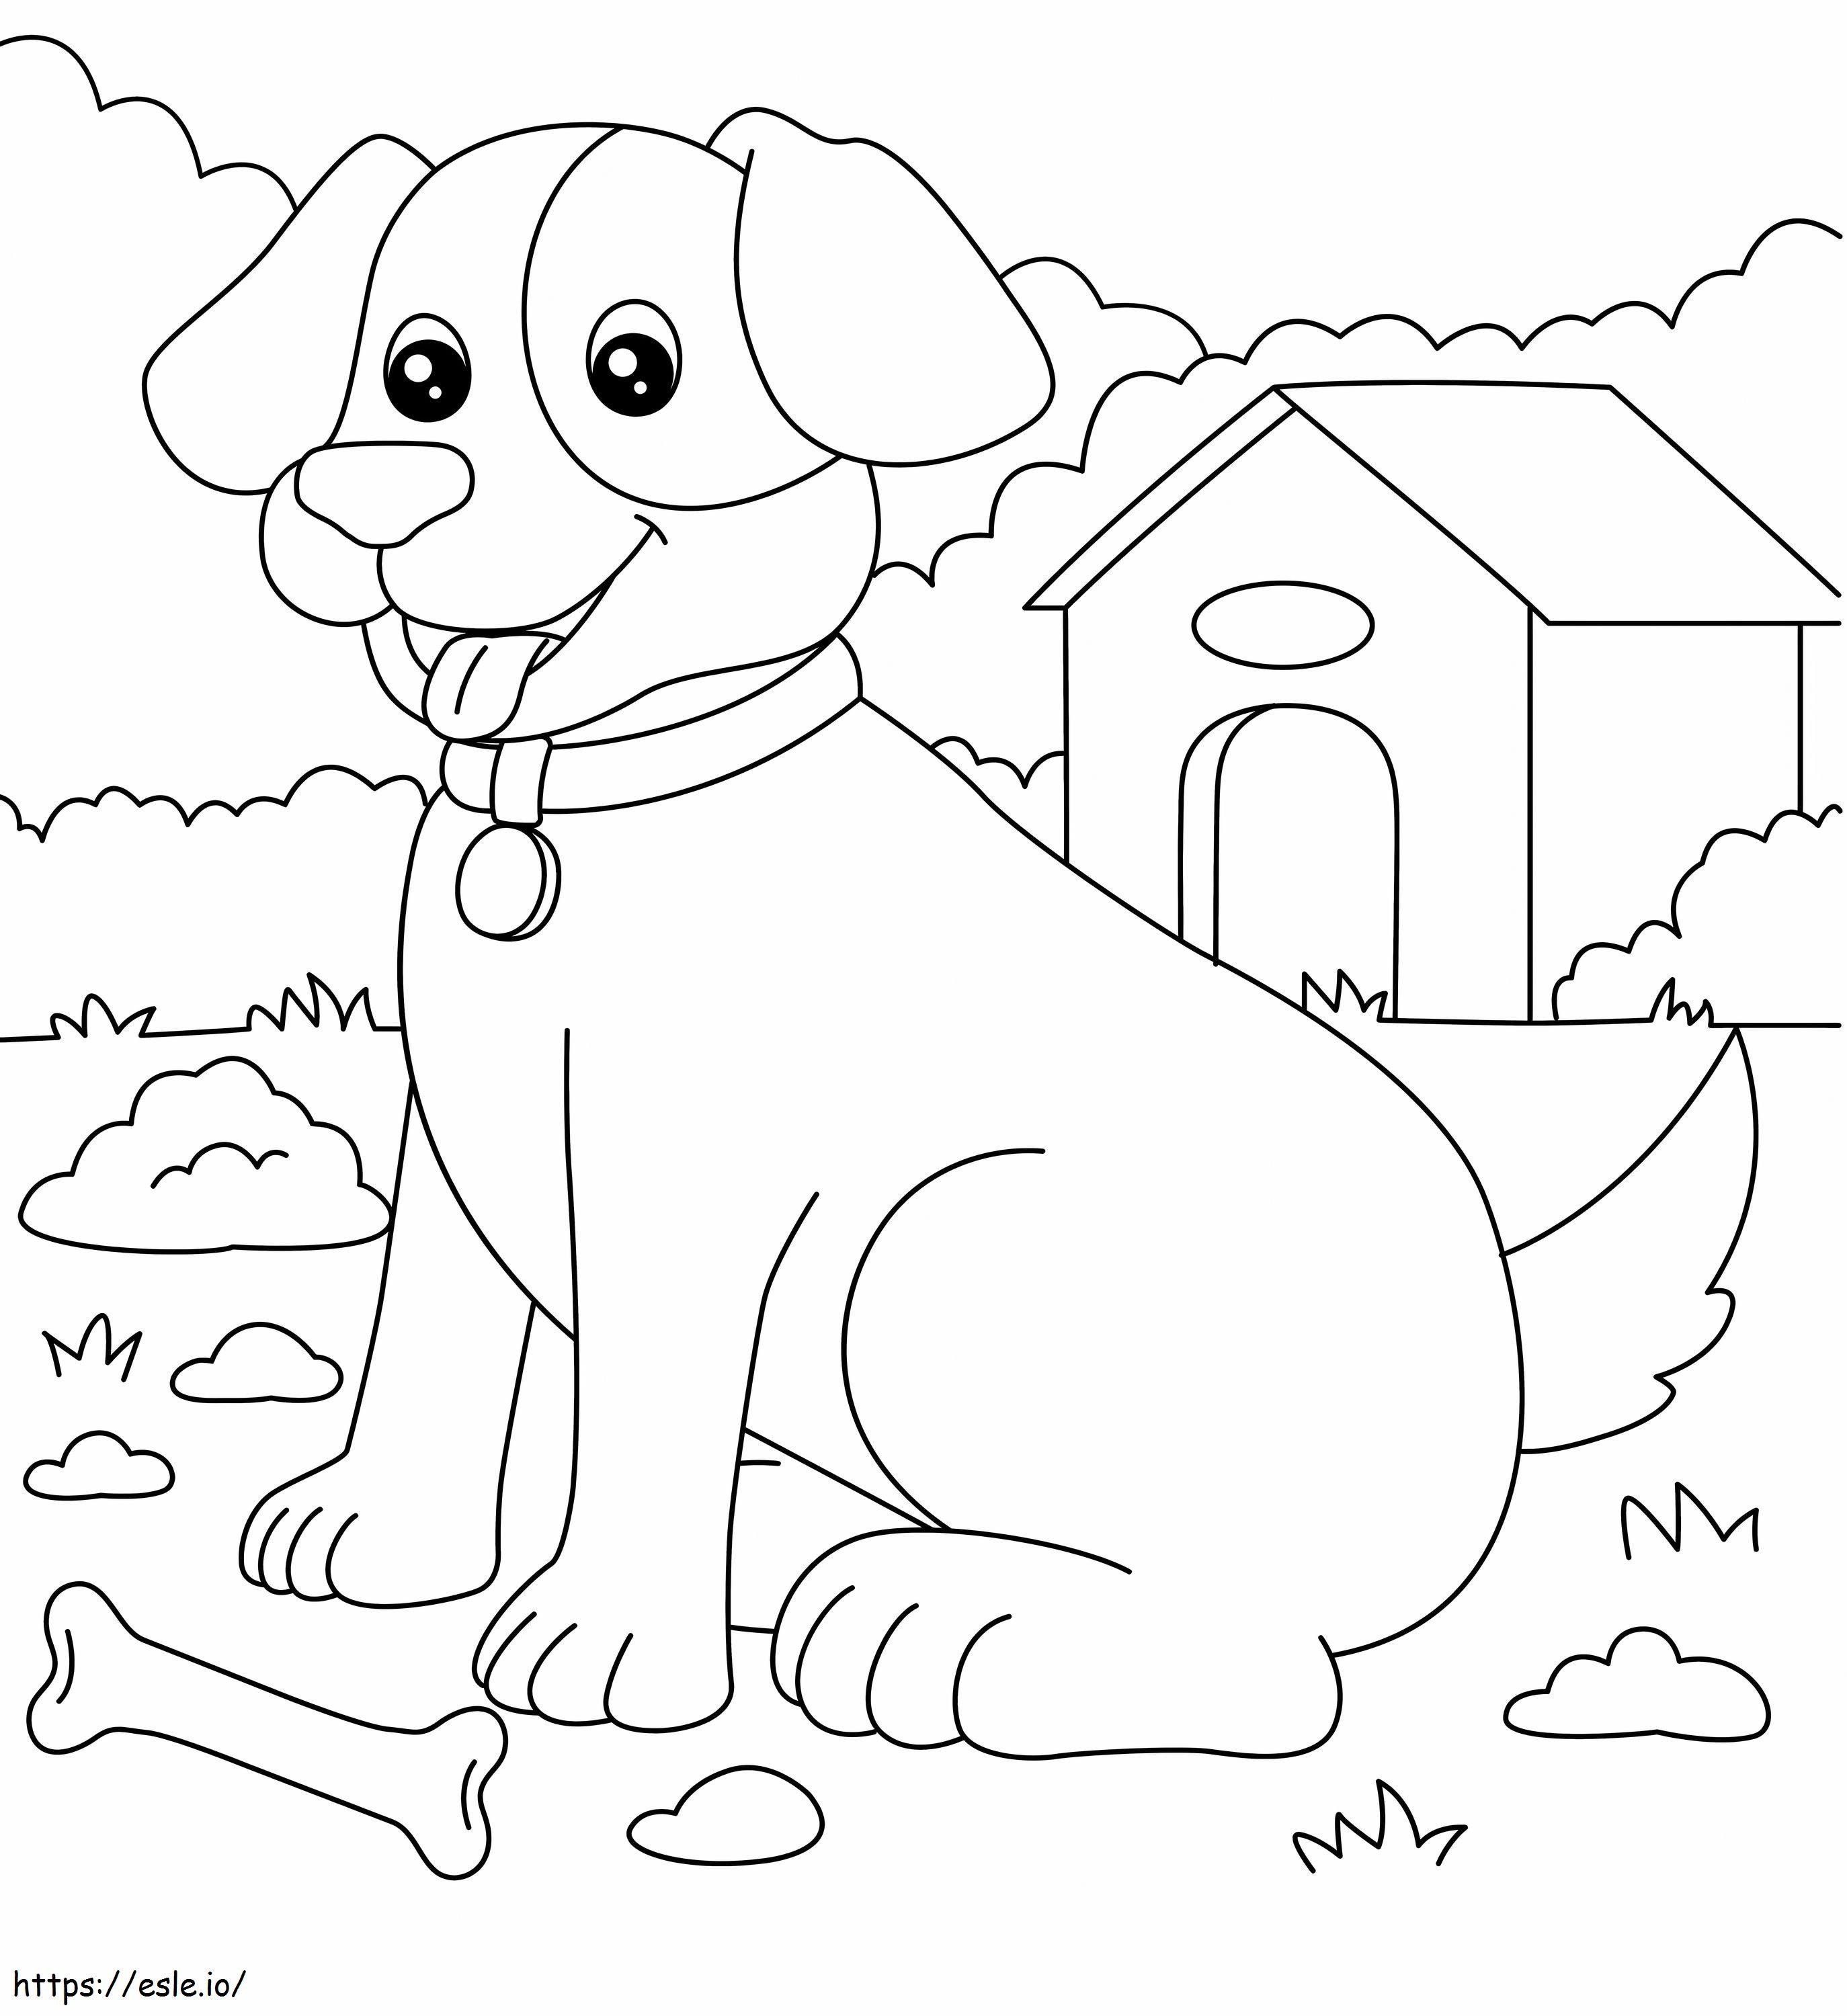 Bony Dog And Domestic Dog coloring page